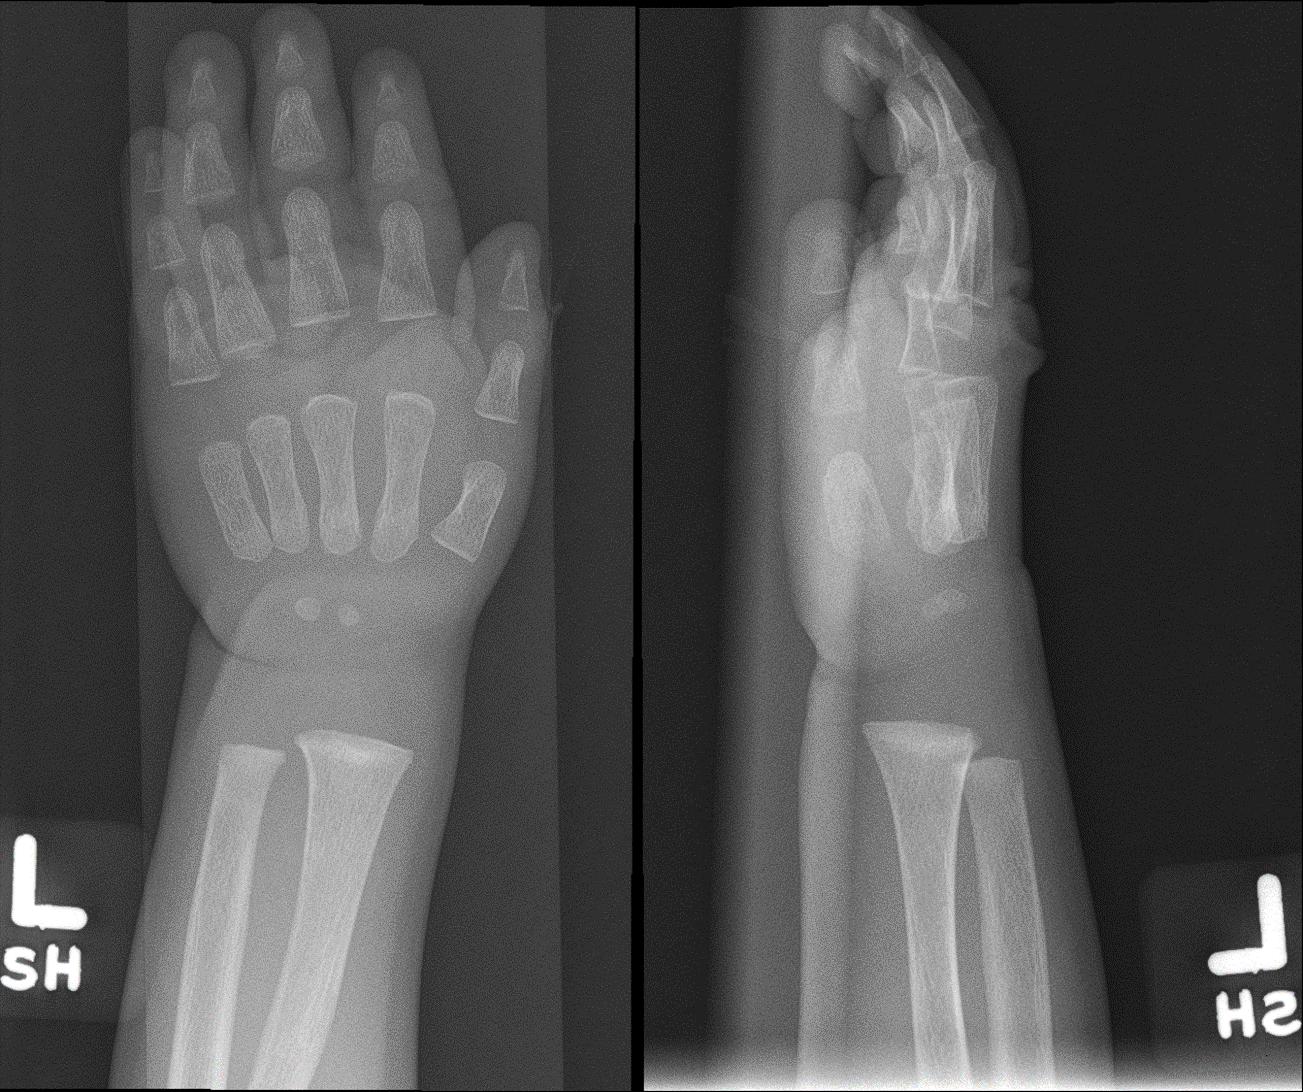 Radiograph of the left wrist (anteroposterior and lateral views) taken three months later showing improved density and appearance of the distal metaphysis after initiation of treatment for rickets. Improved mineralization of the bones also seen.

